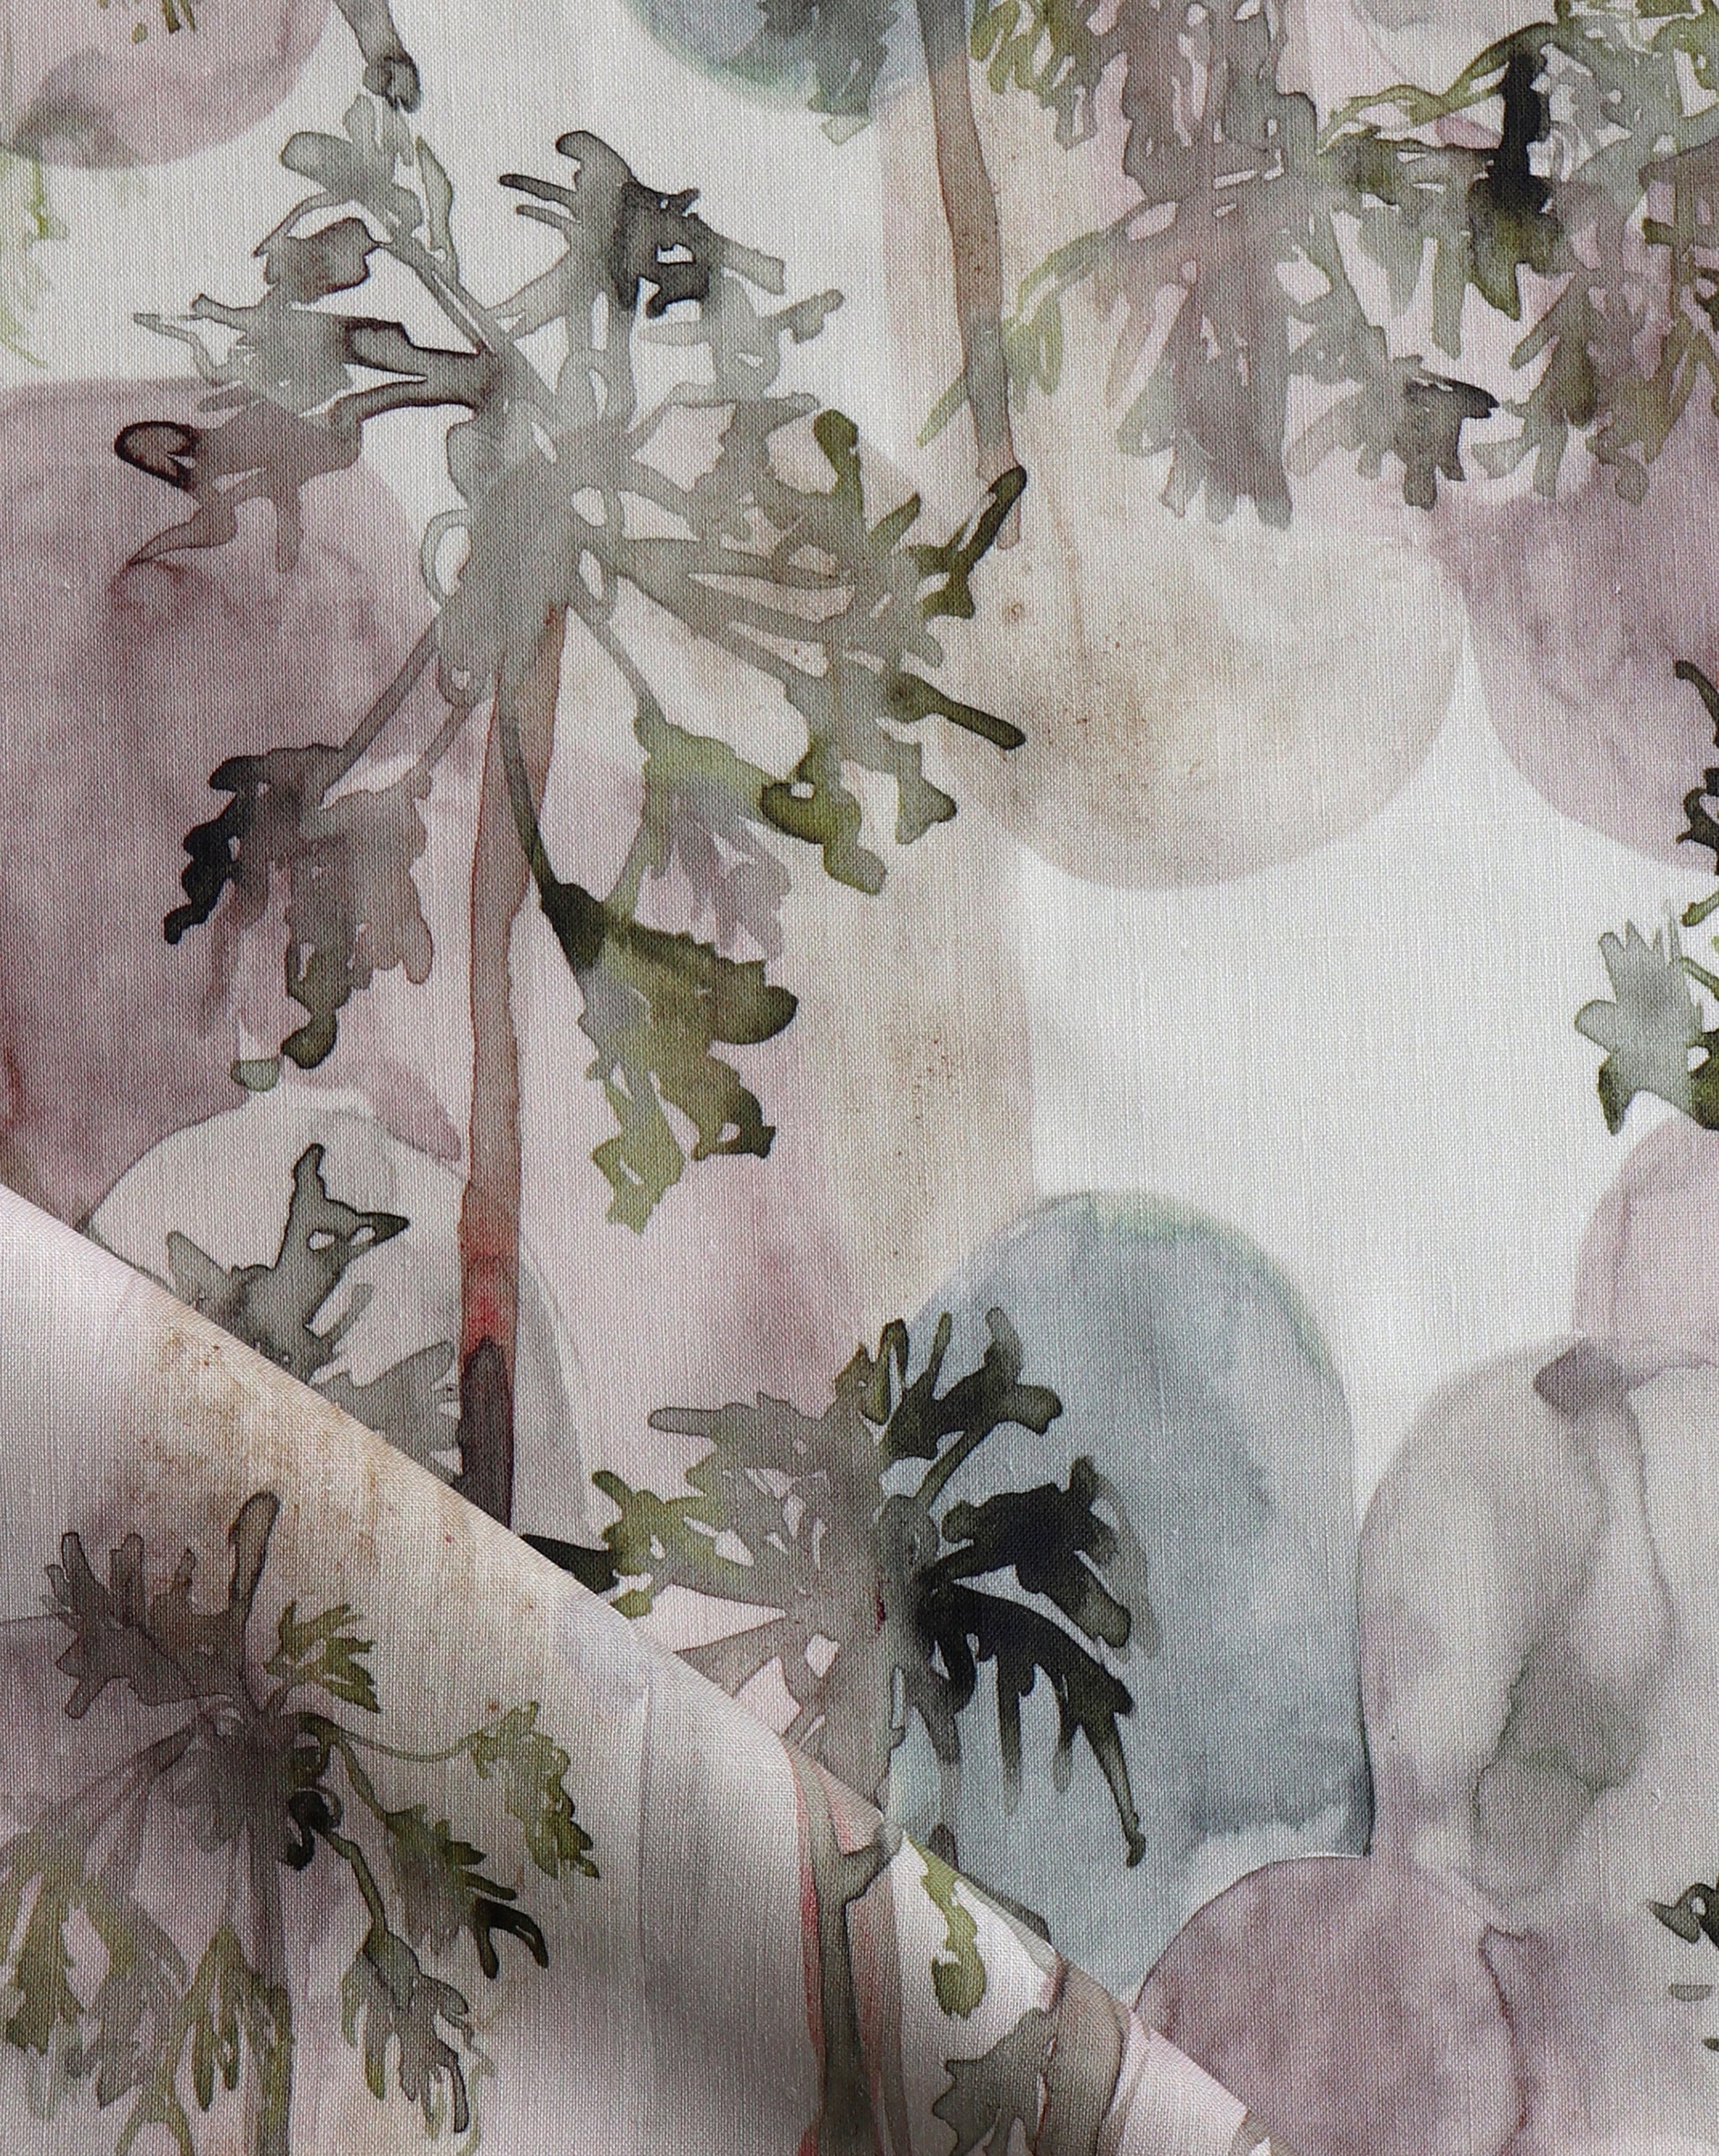 Featuring watercolor studies of a tropical tree, Papaya Arc fabric in our Dusk colorway juxtaposes avocado green with muted pinks.